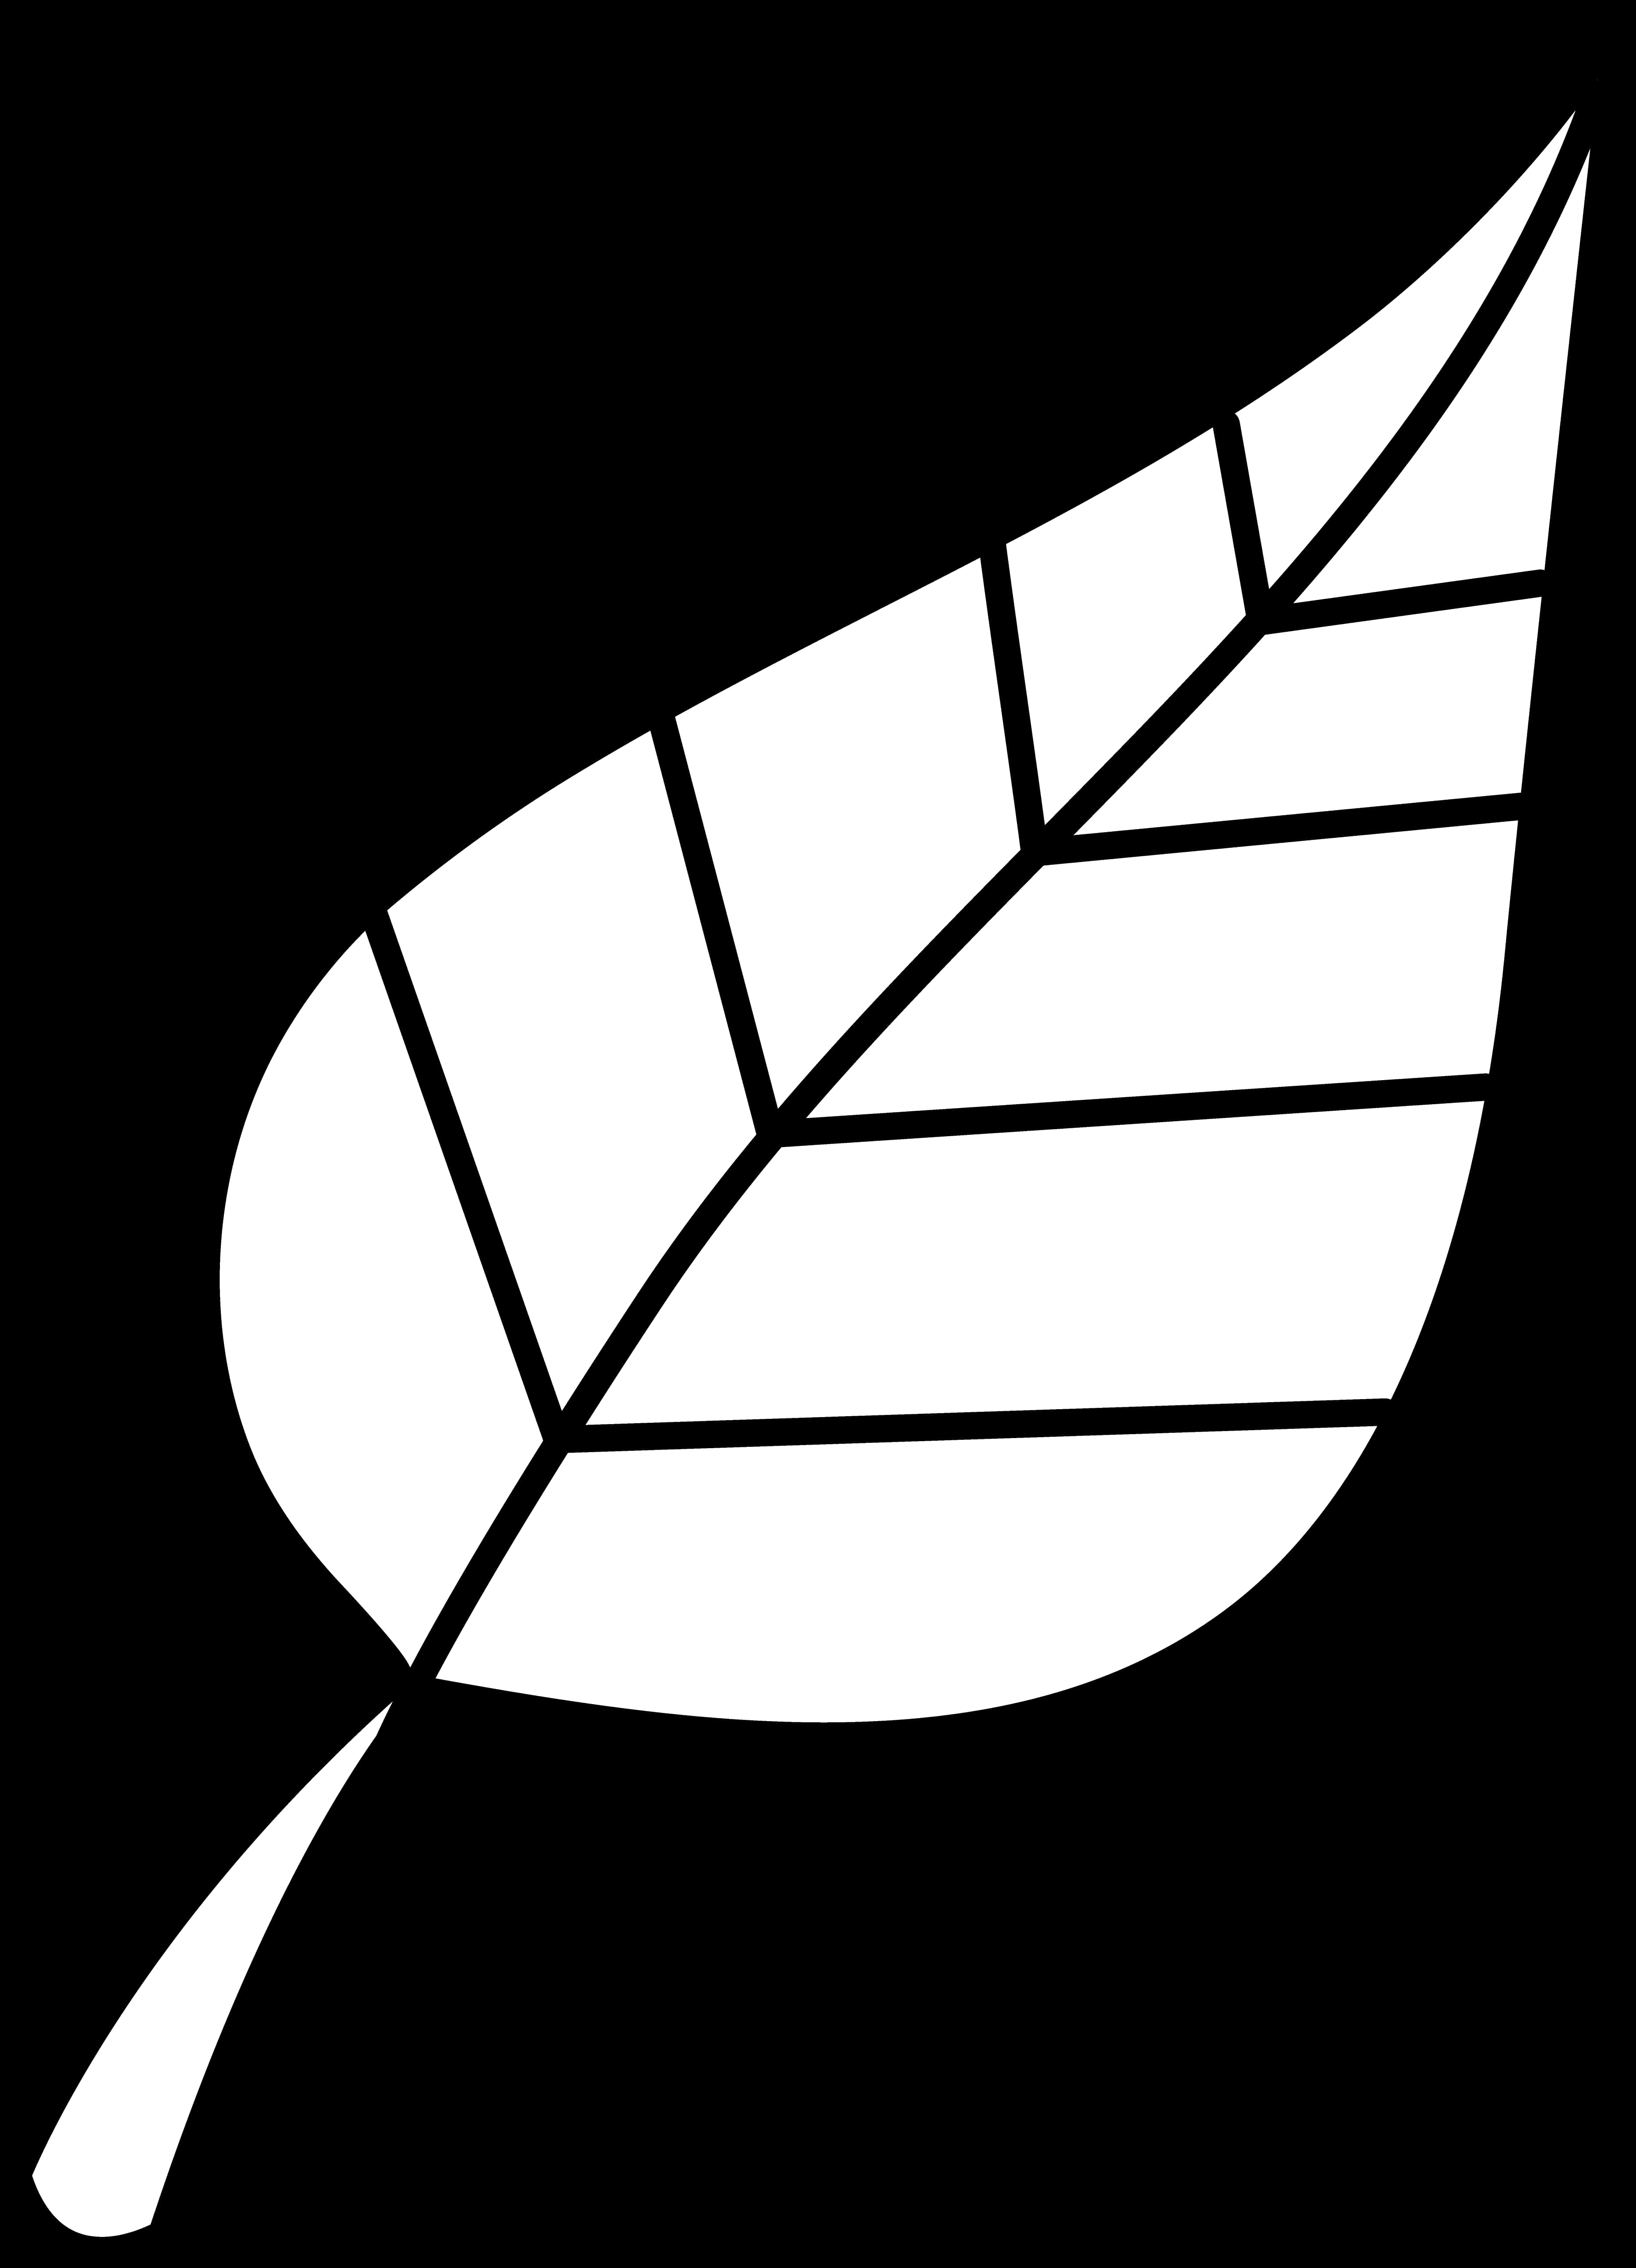 Simplified Leaf Graphic Blackand White PNG